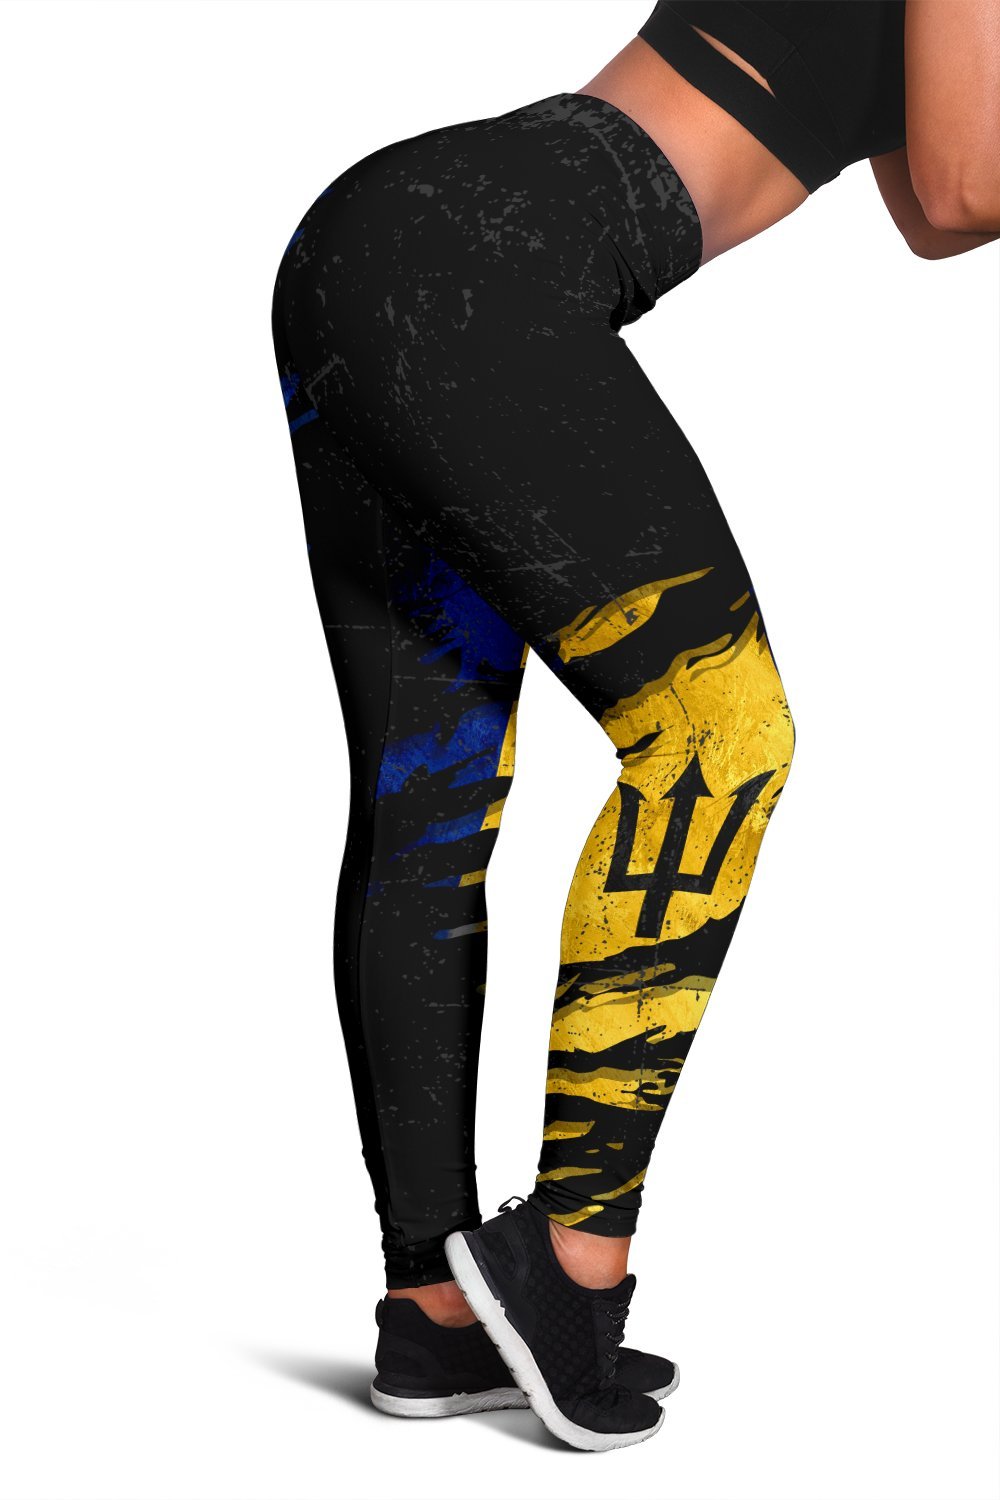 barbados-in-me-womens-leggings-special-grunge-style